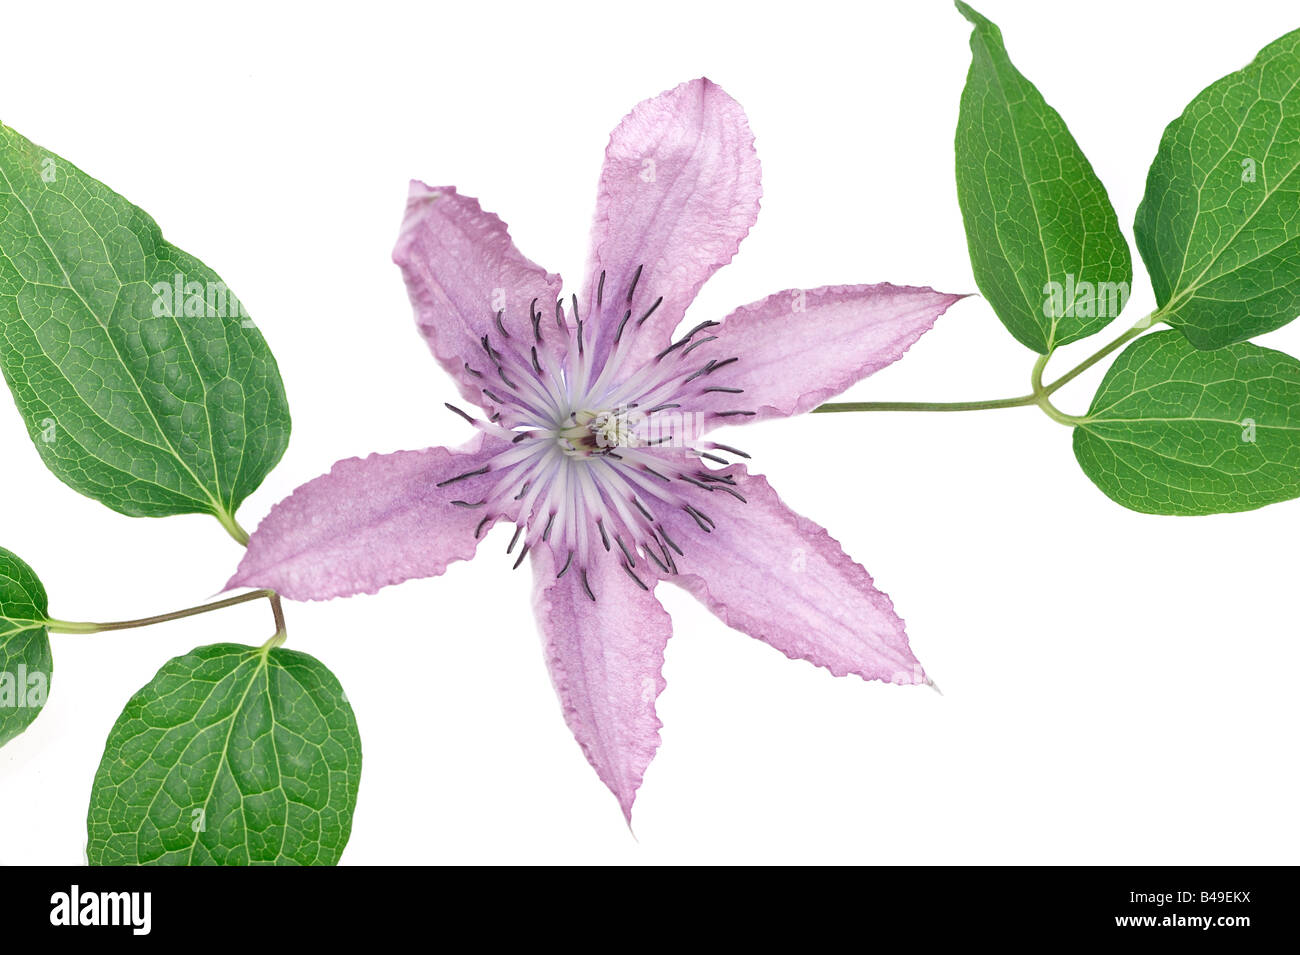 Clematis Flower and Leaves Stock Photo